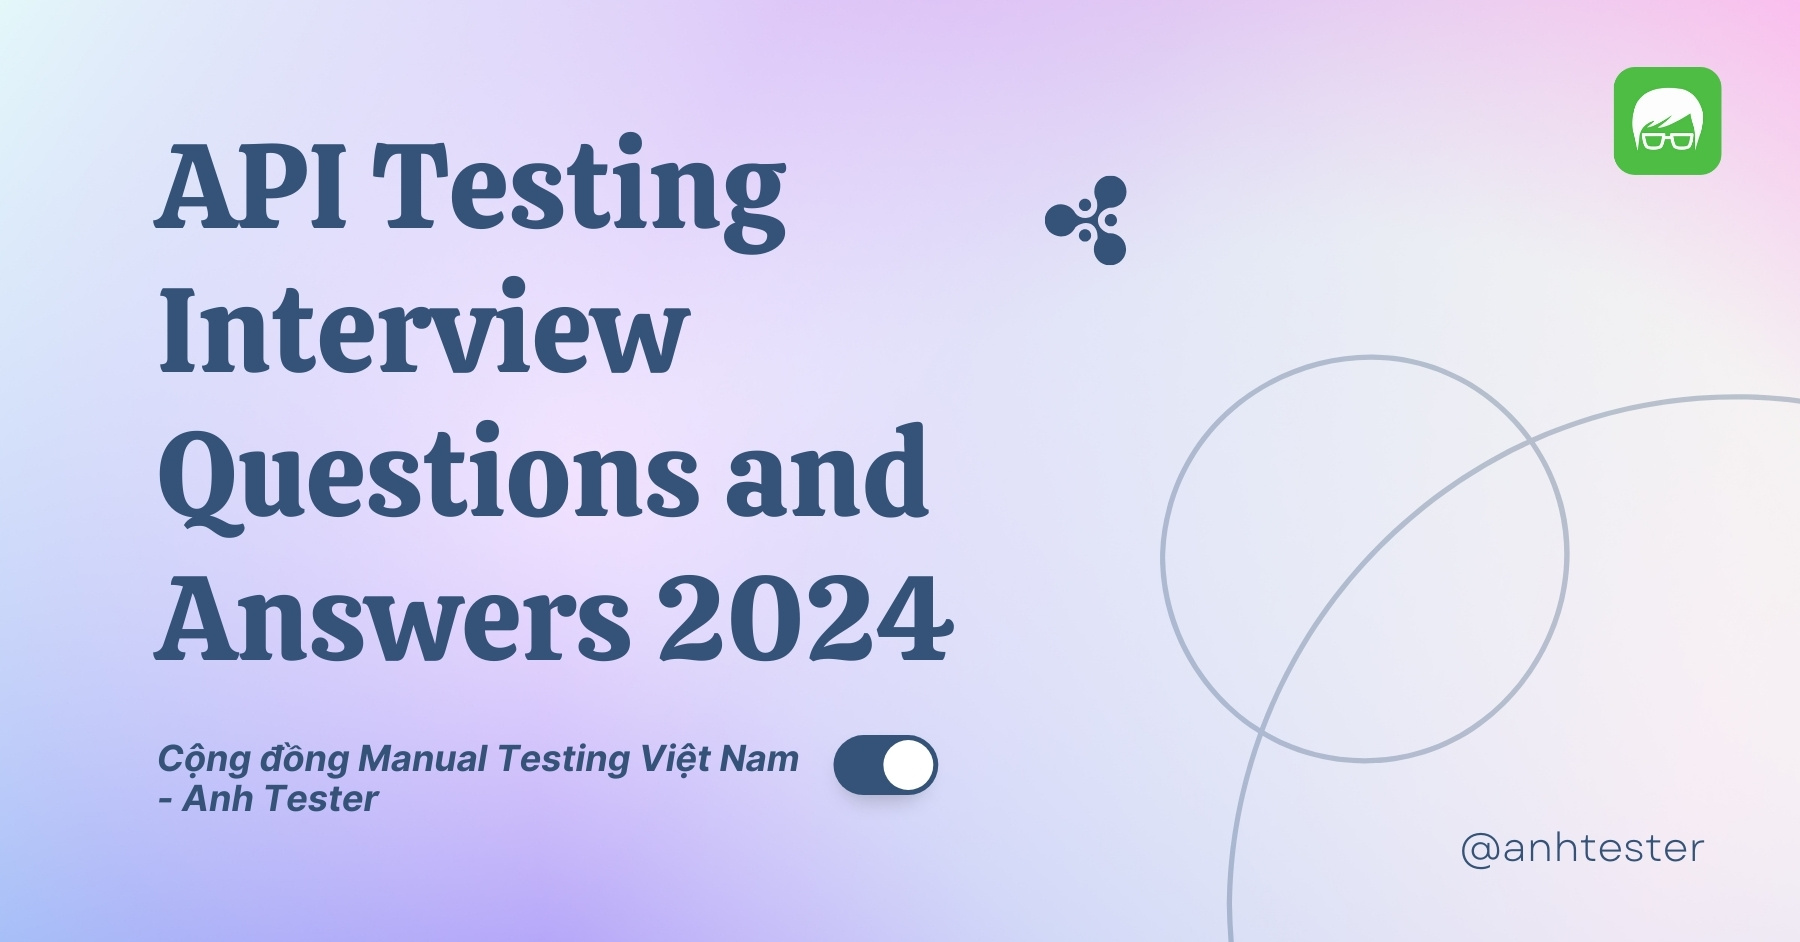 API Testing Interview Questions and Answers 2024